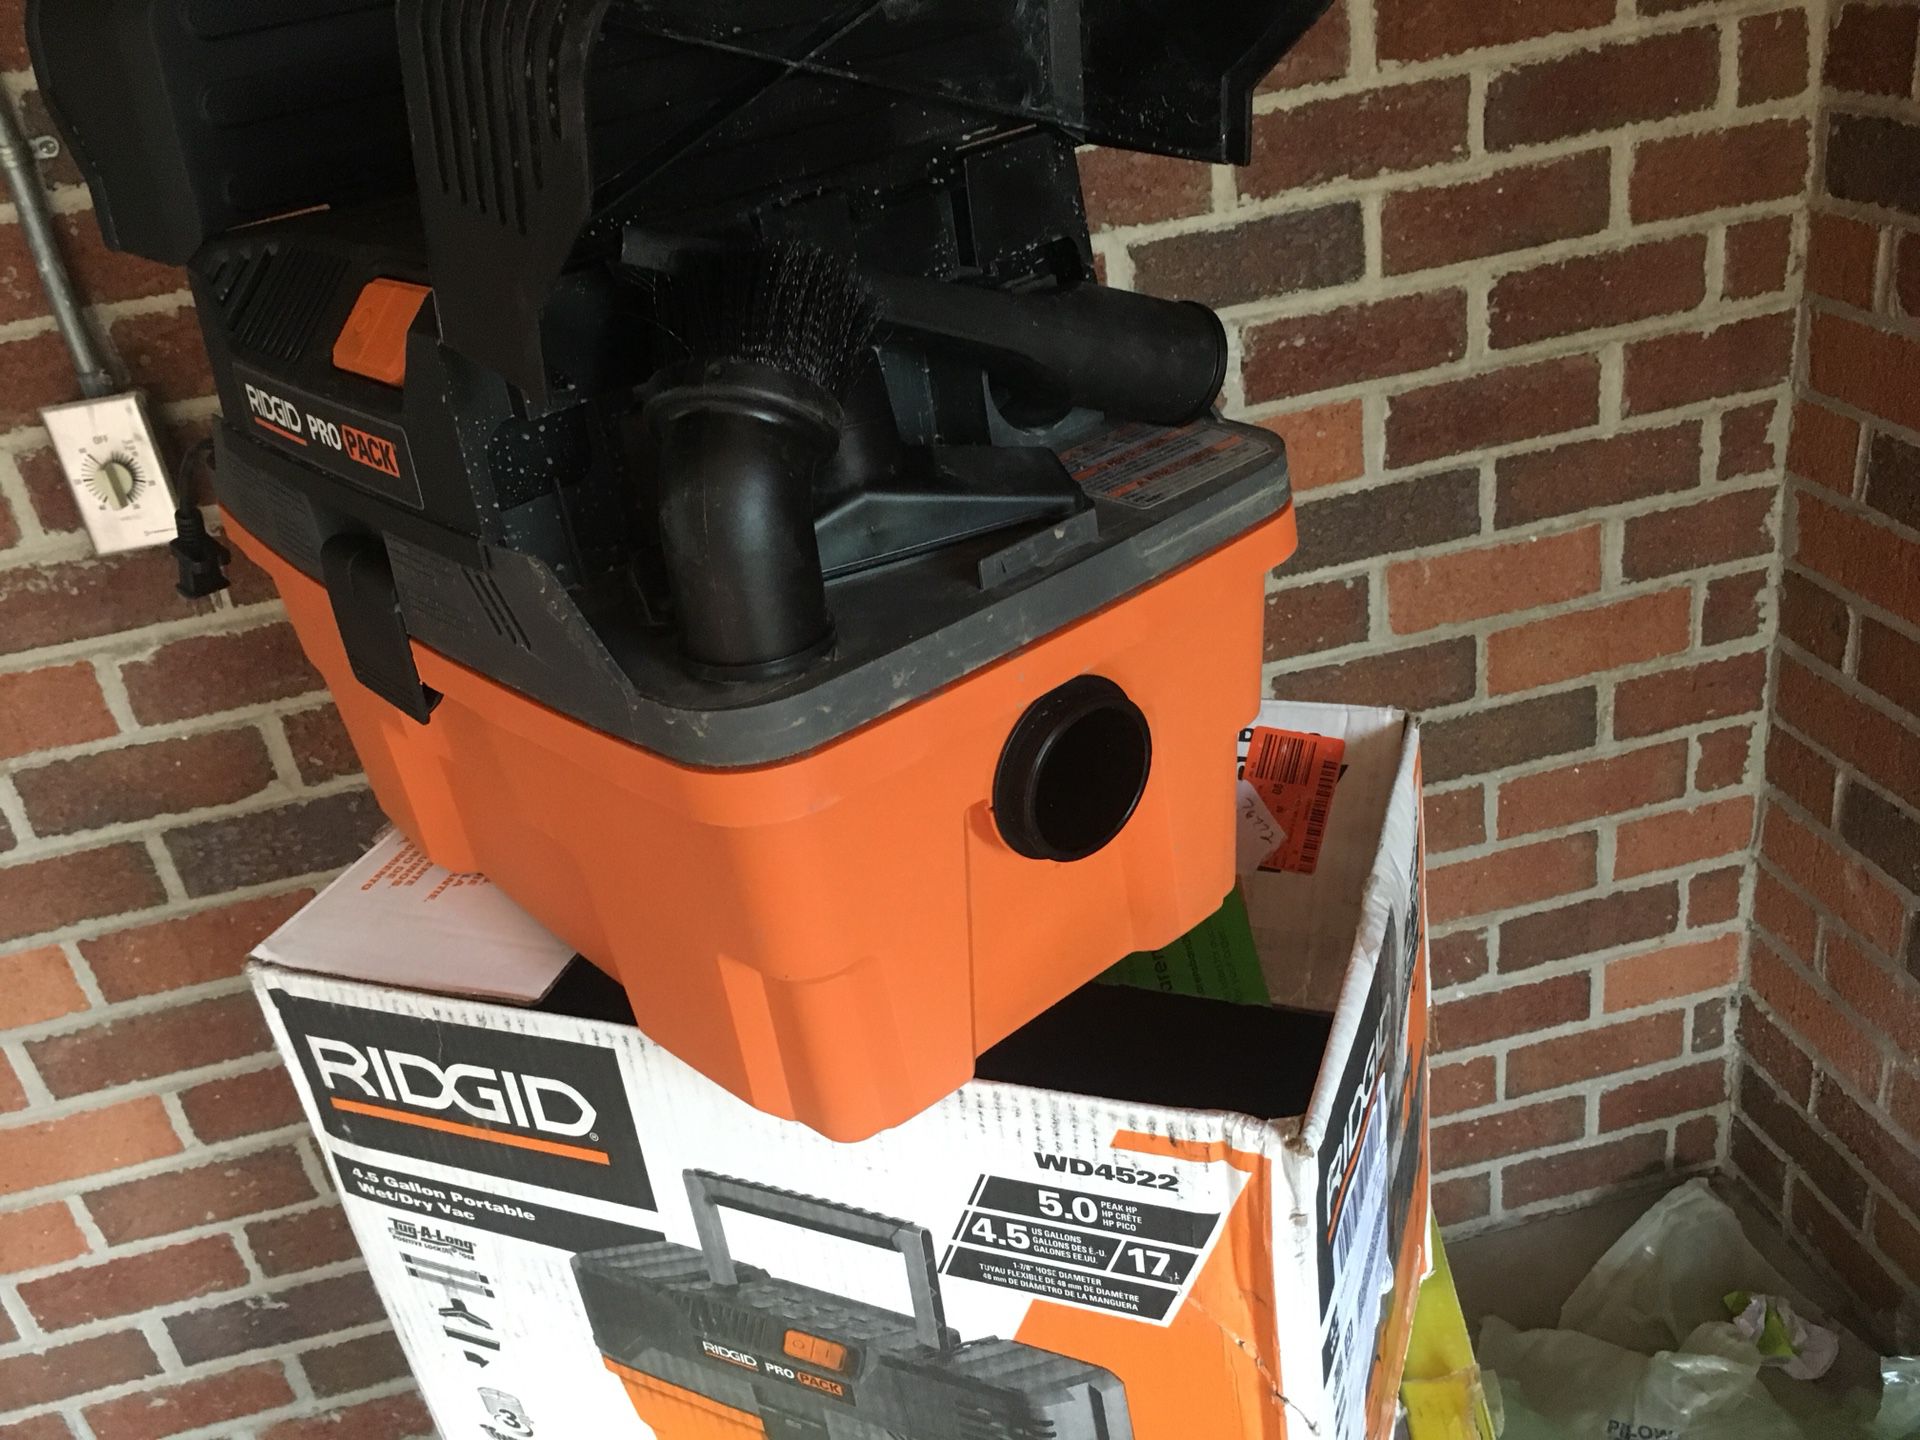 RIDGID 4.5 gal. 5.0-Peak HP Pro Pack Wet Dry Vac like new without a filter